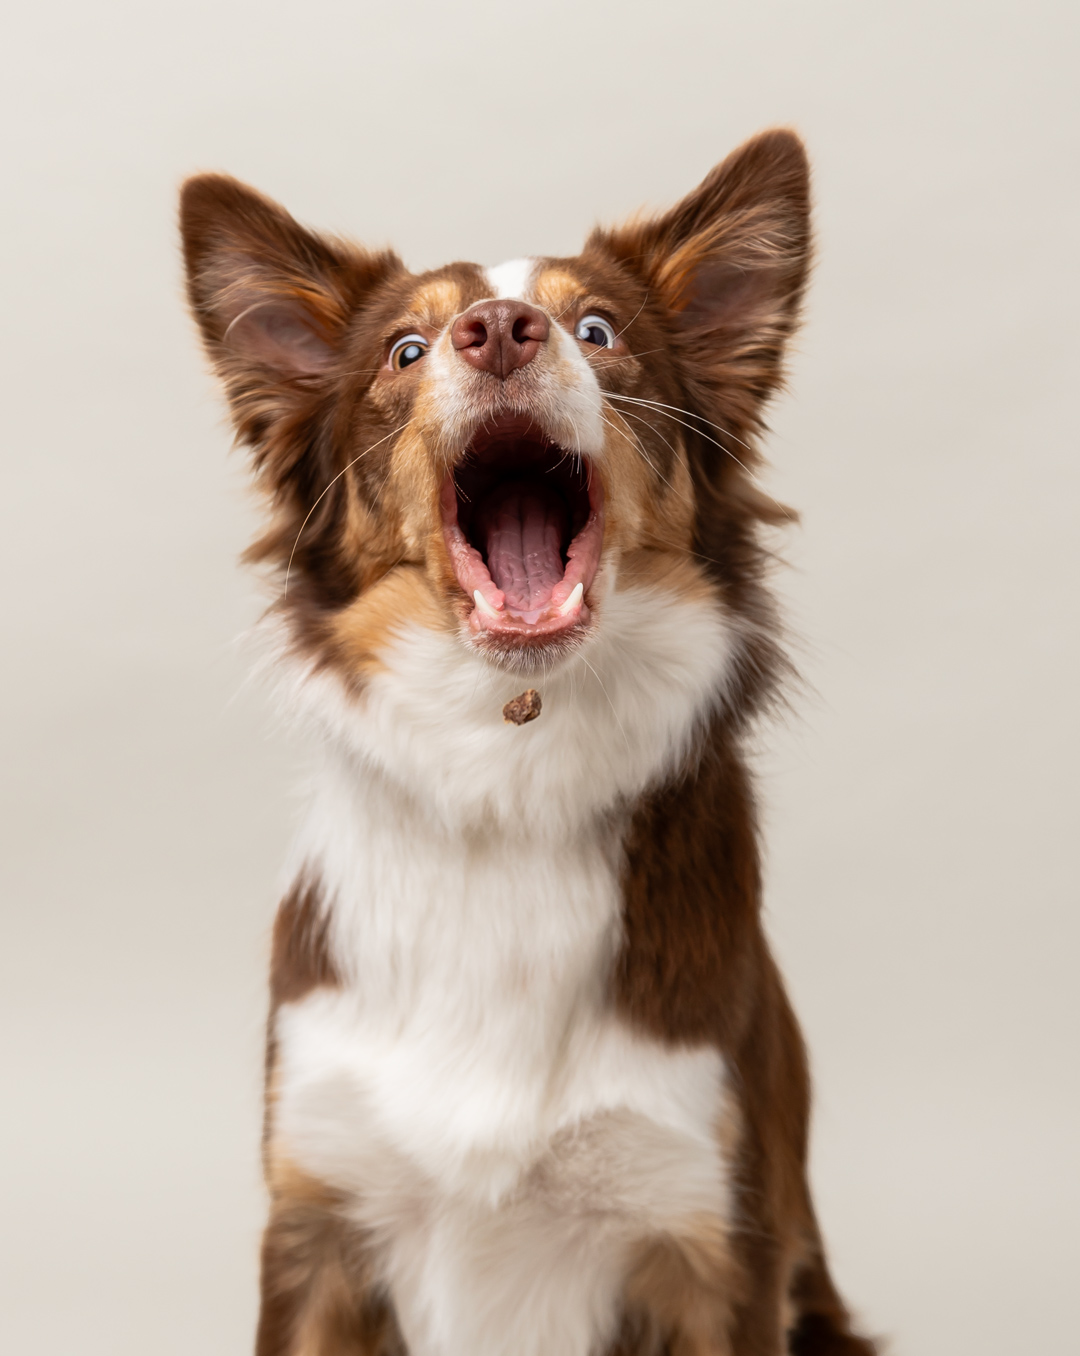 Studio photo of a dog catching a treat making a funny face